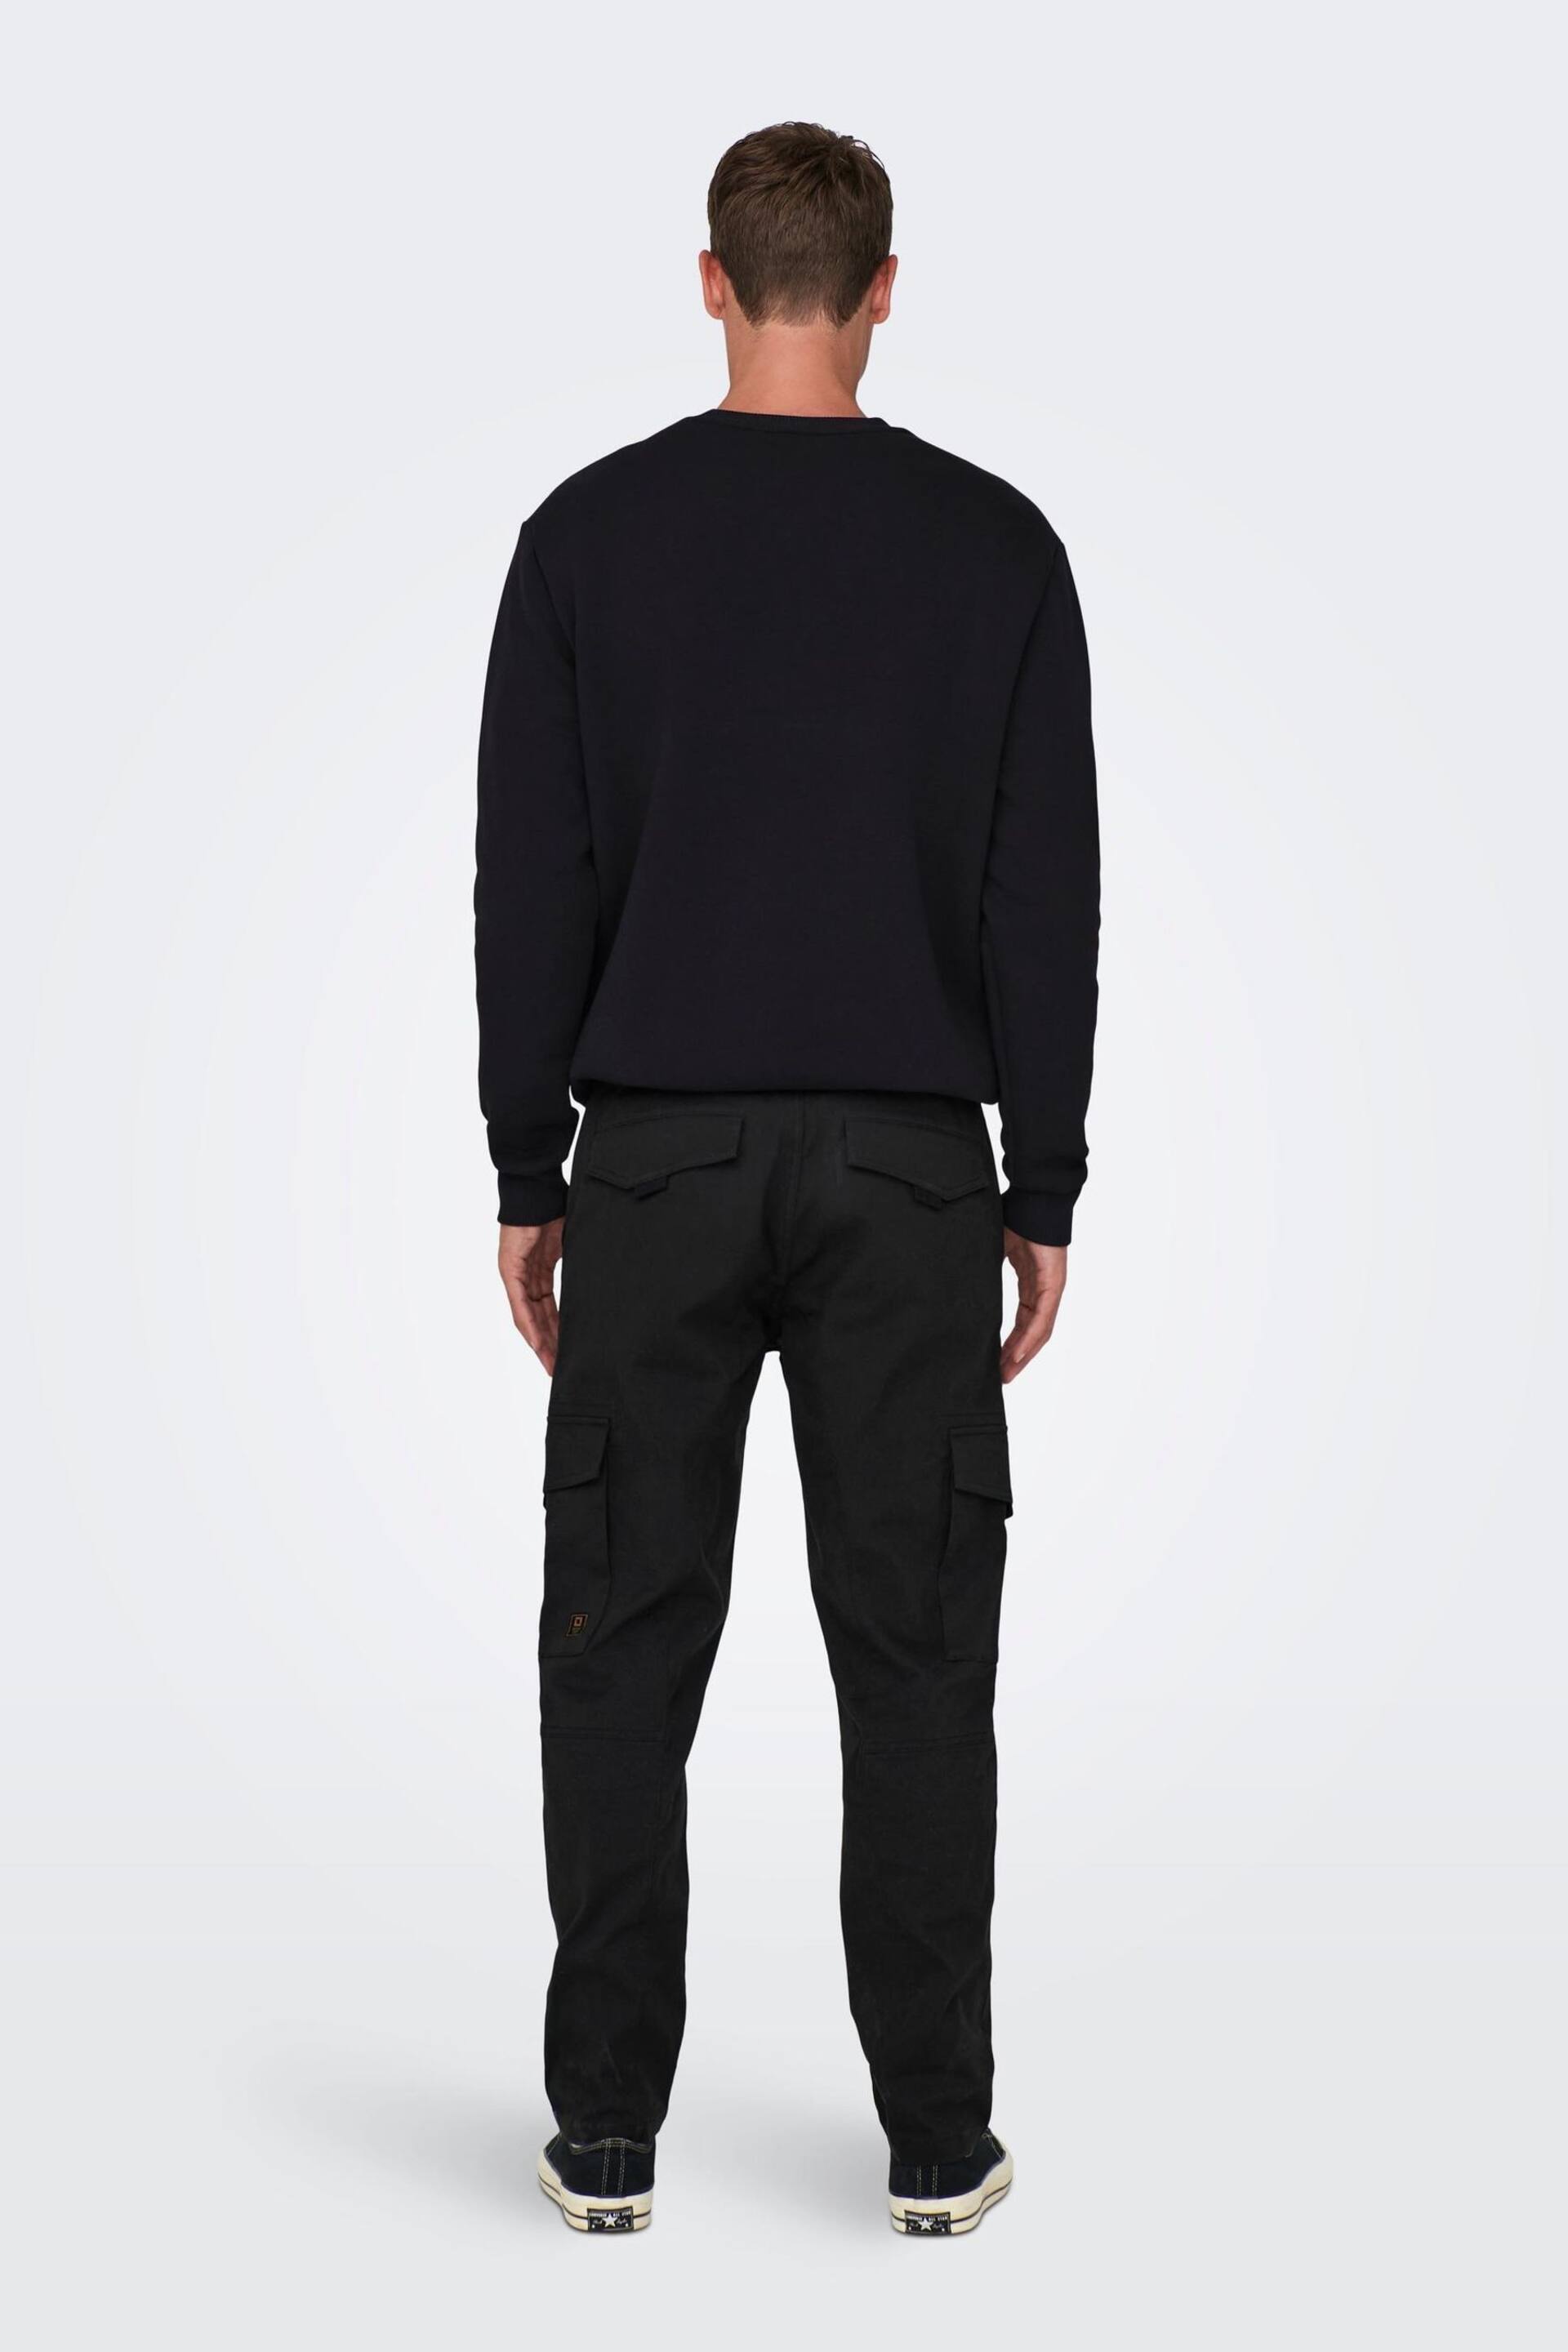 Only & Sons Black Straight Leg Cargo Trousers - Image 2 of 7